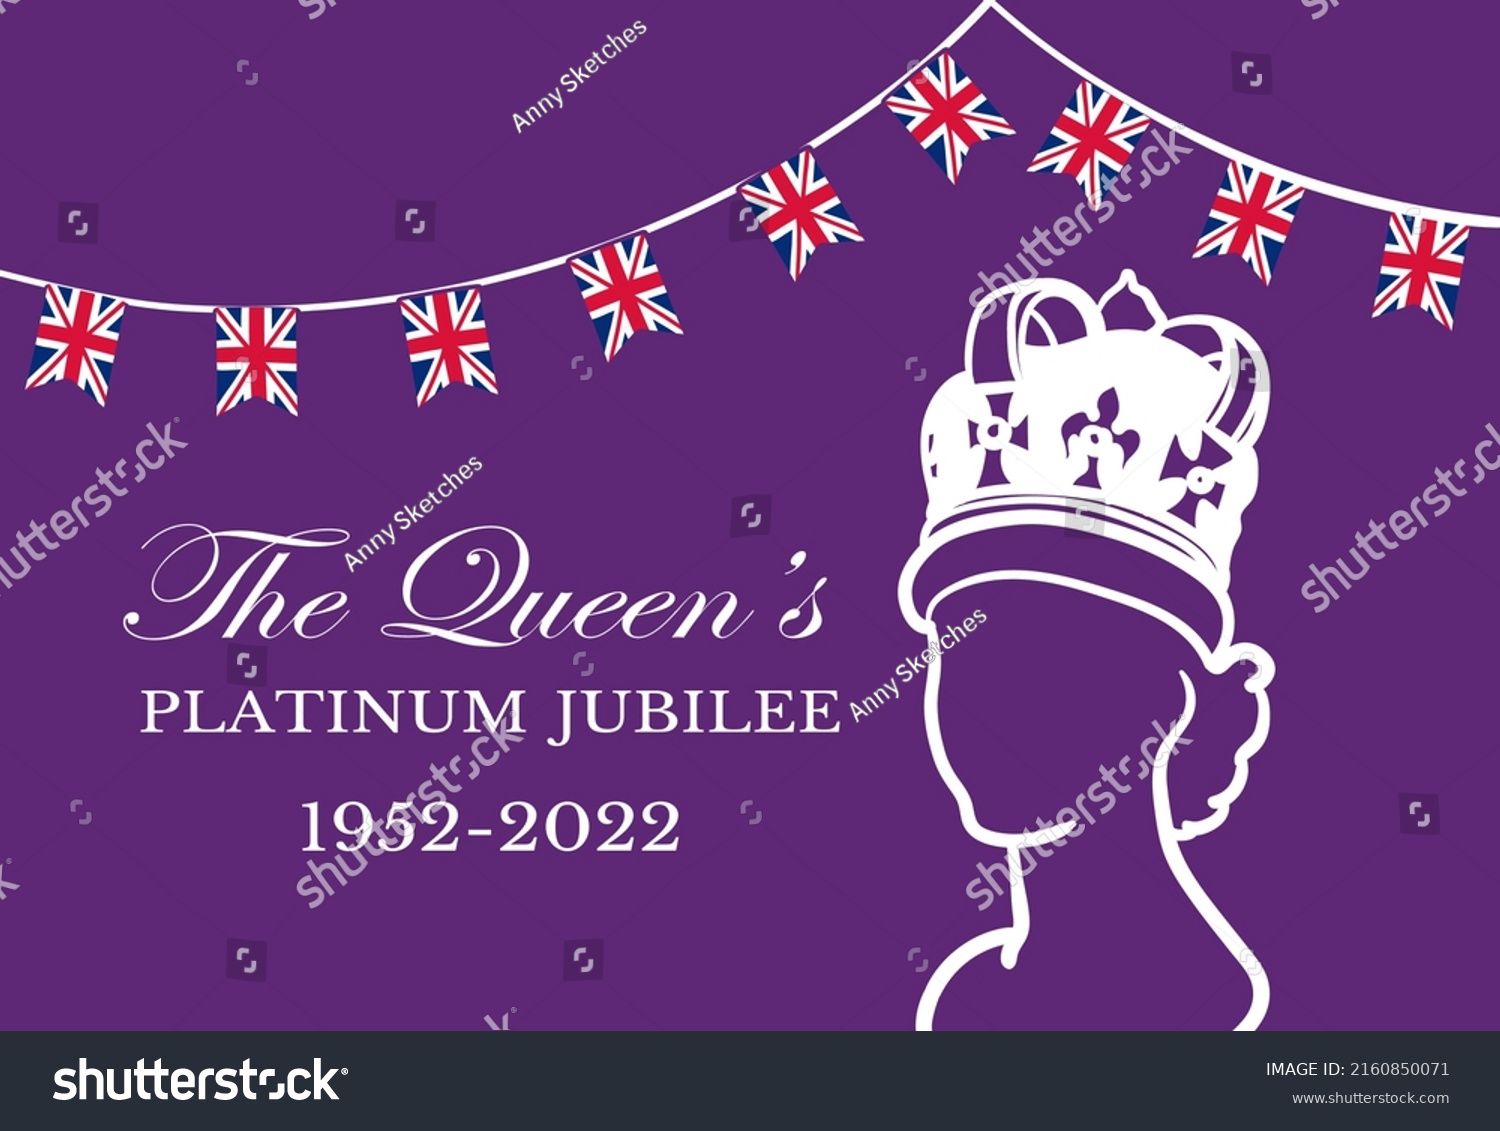 SVG of The Queen's Platinum Jubilee celebration poster background with silhouette of Queen Elizabeth. Vector illustration for Her Majesty The Queen on her 70 years of service from 1952 to 2022 svg